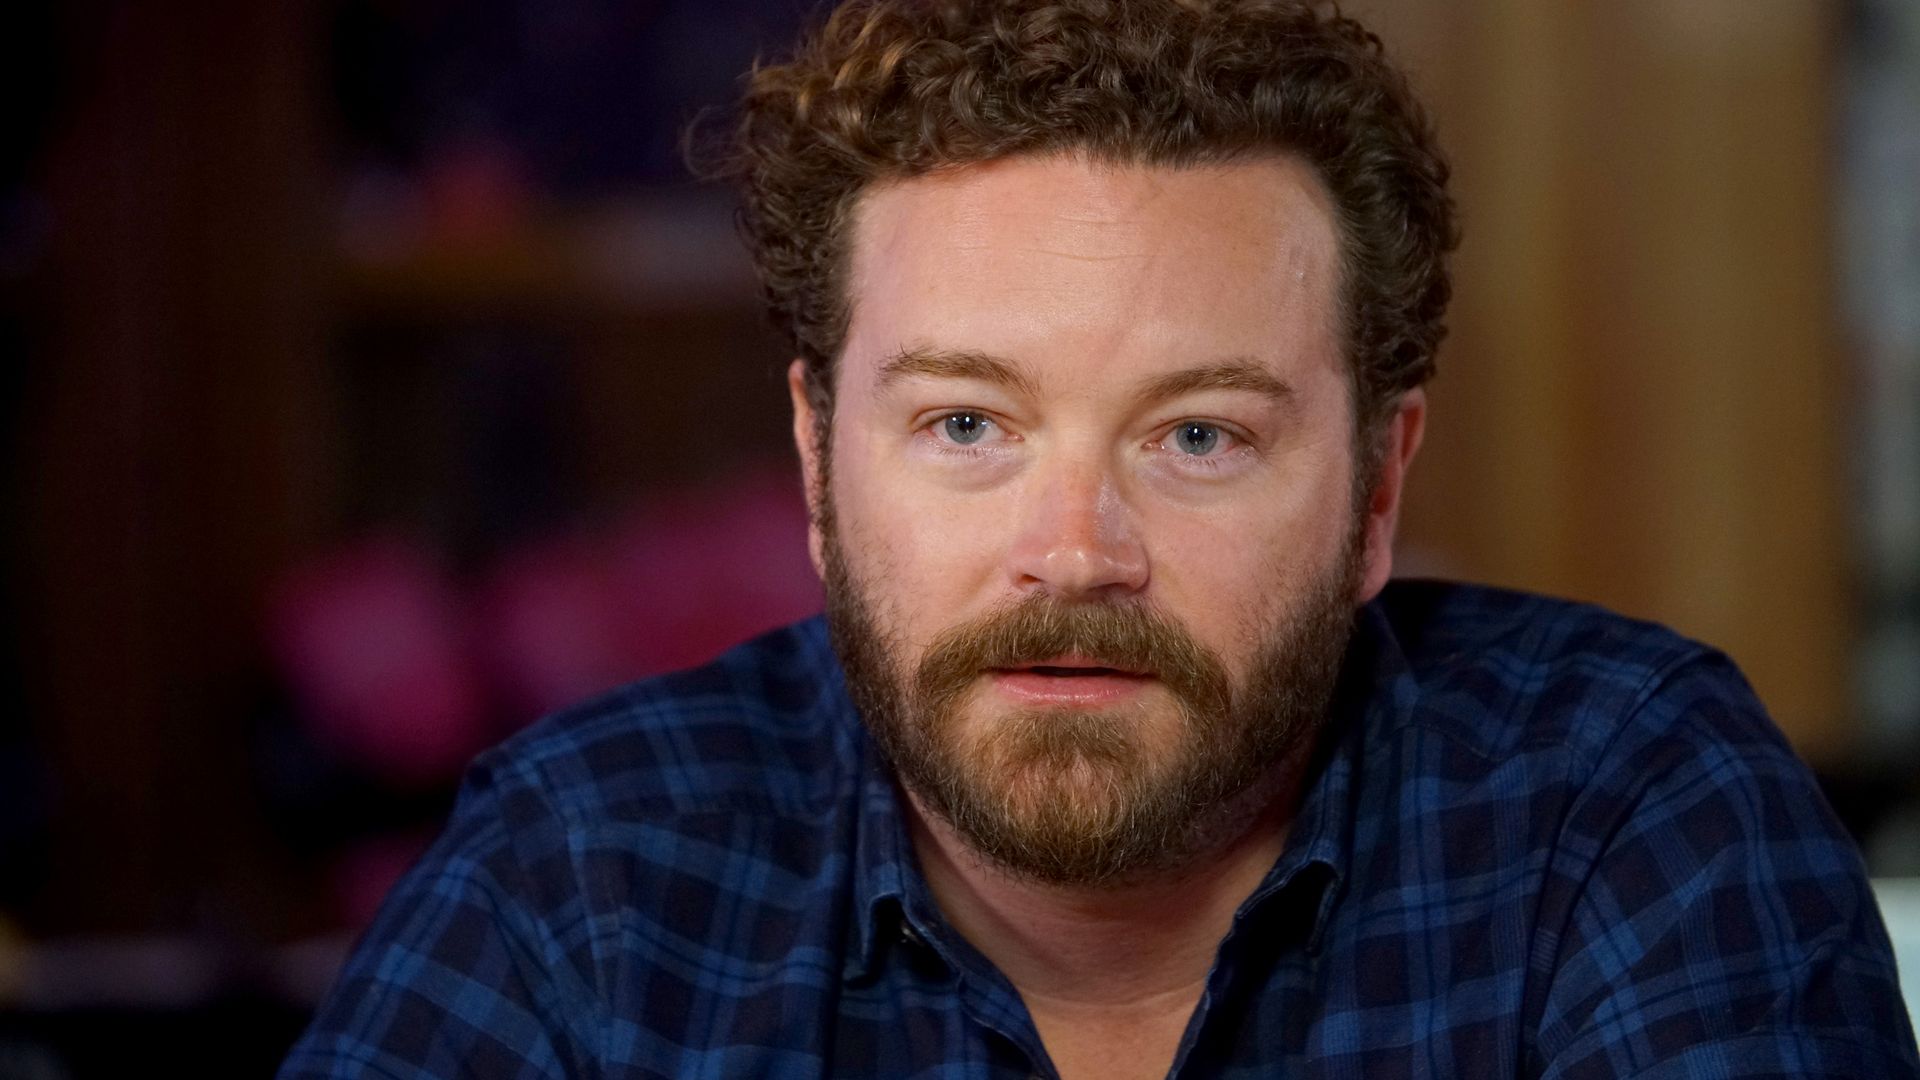 Danny Masterson speaks during a Launch Event for Netflix "The Ranch: Part 3" hosted by Ashton Kutcher and Danny Masterson  at Tequila Cowboy on June 7, 2017 in Nashville, Tennessee.  (Photo by Anna Webber/Getty Images for Netflix)